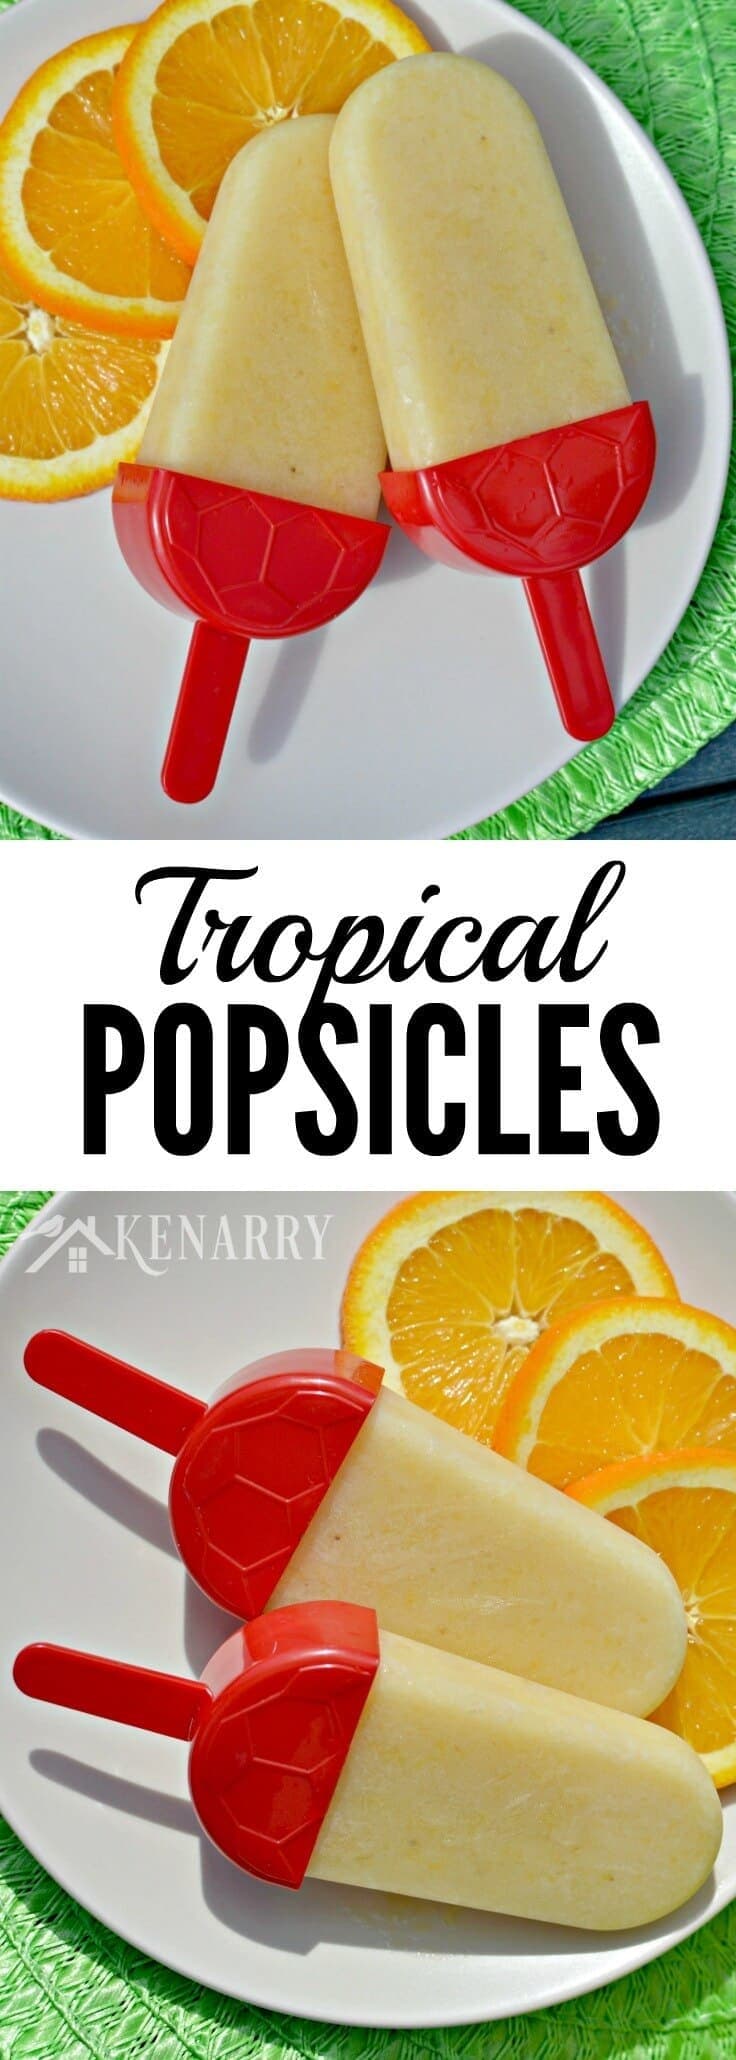 Yum! This Tropical Popsicles recipe looks perfect for a hot summer day. The kids will love this treat made with pineapple, orange and bananas.